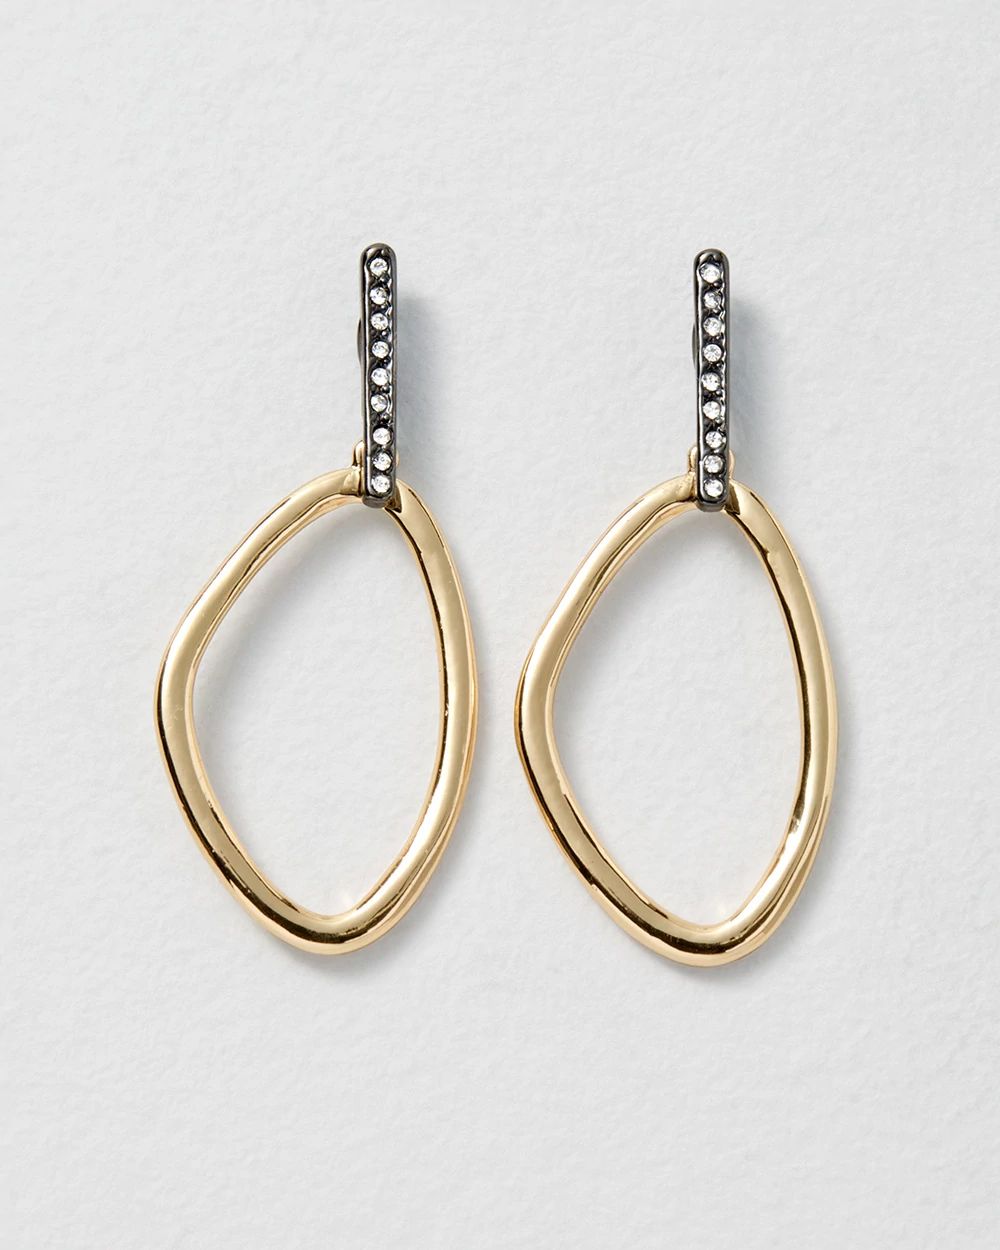 Goldtone & Hematite Abstract Hoop Earrings click to view larger image.